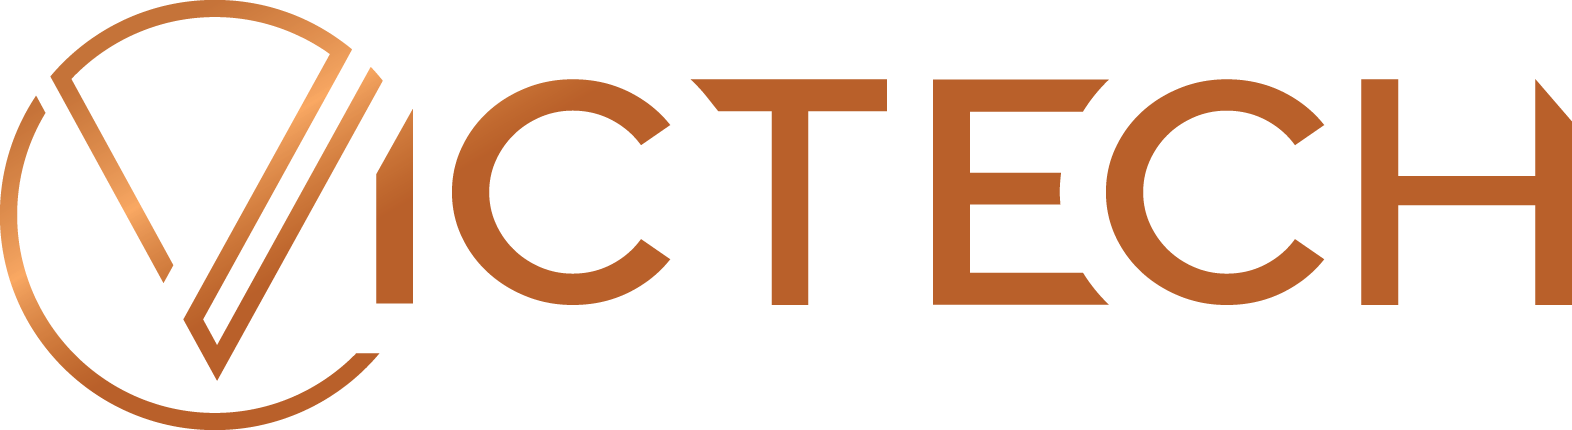 Victech Electrical Group Melbourne | Residential | Commercial | Industrial Logo